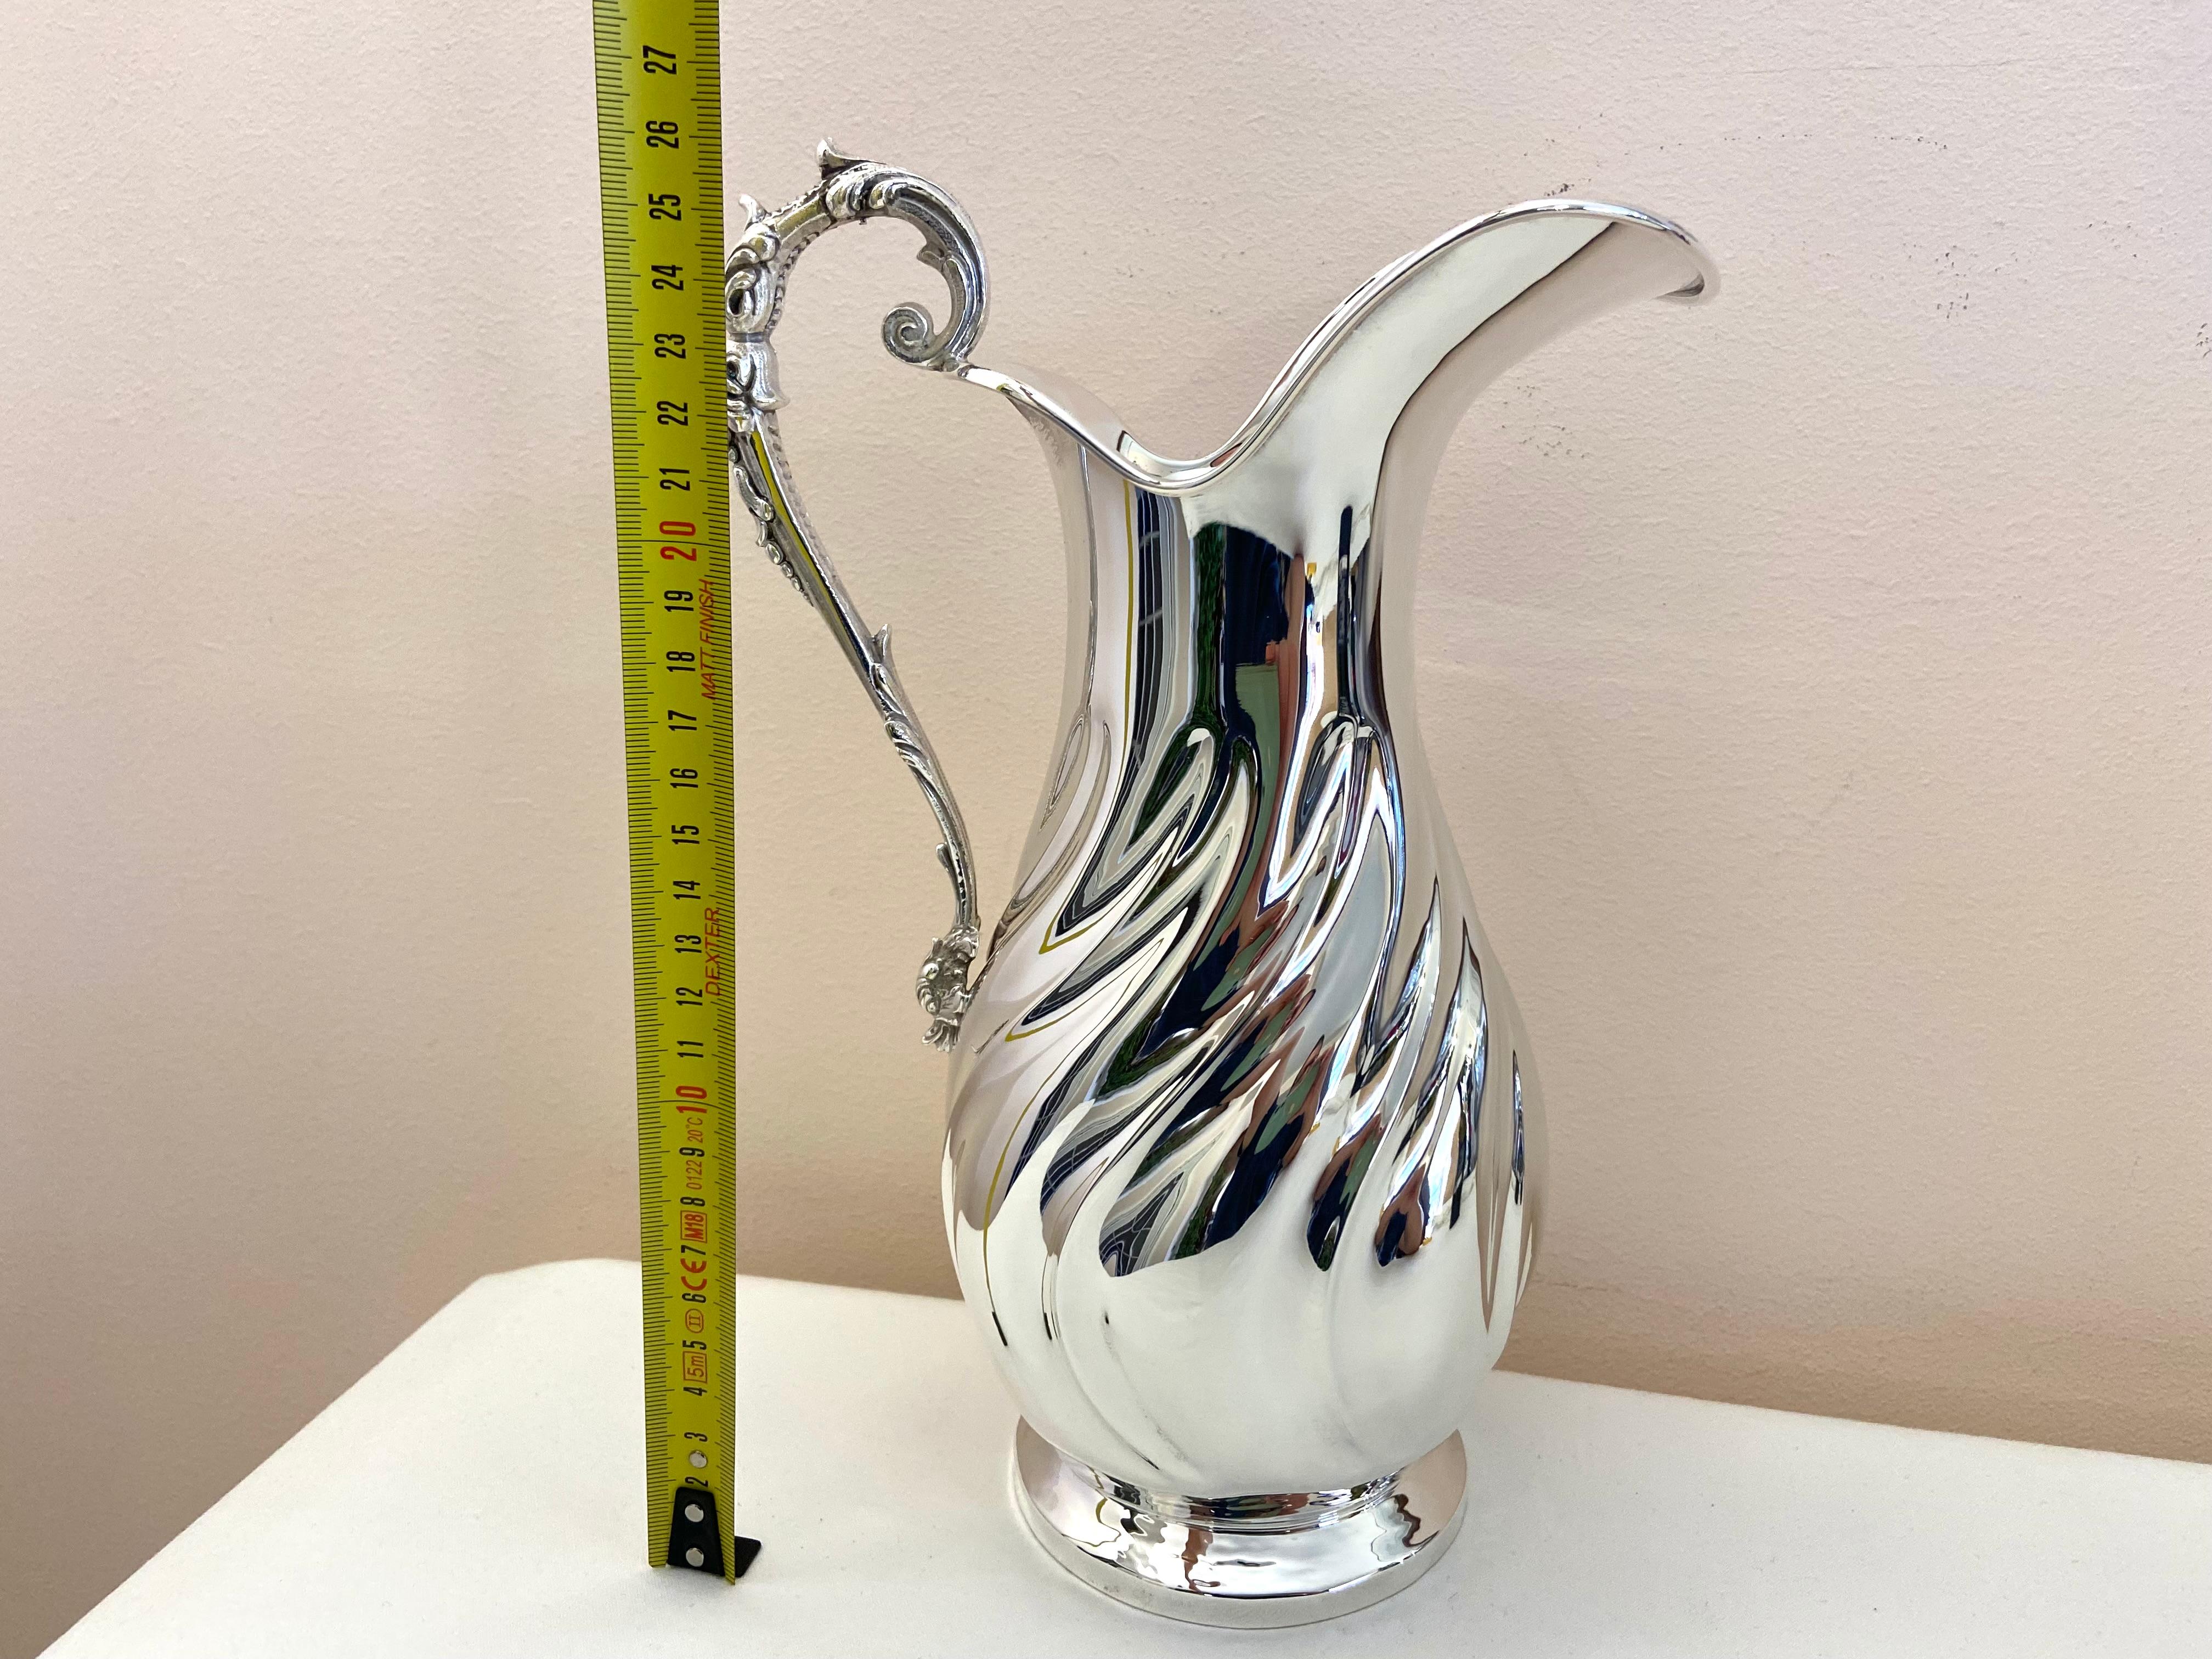 800 Silver Pitcher, new item from my jewelry.
27 cm high and 17 cm wide; It weighs 720 grams. Silver title 800 thousandths. Regularly stamped with state marks.